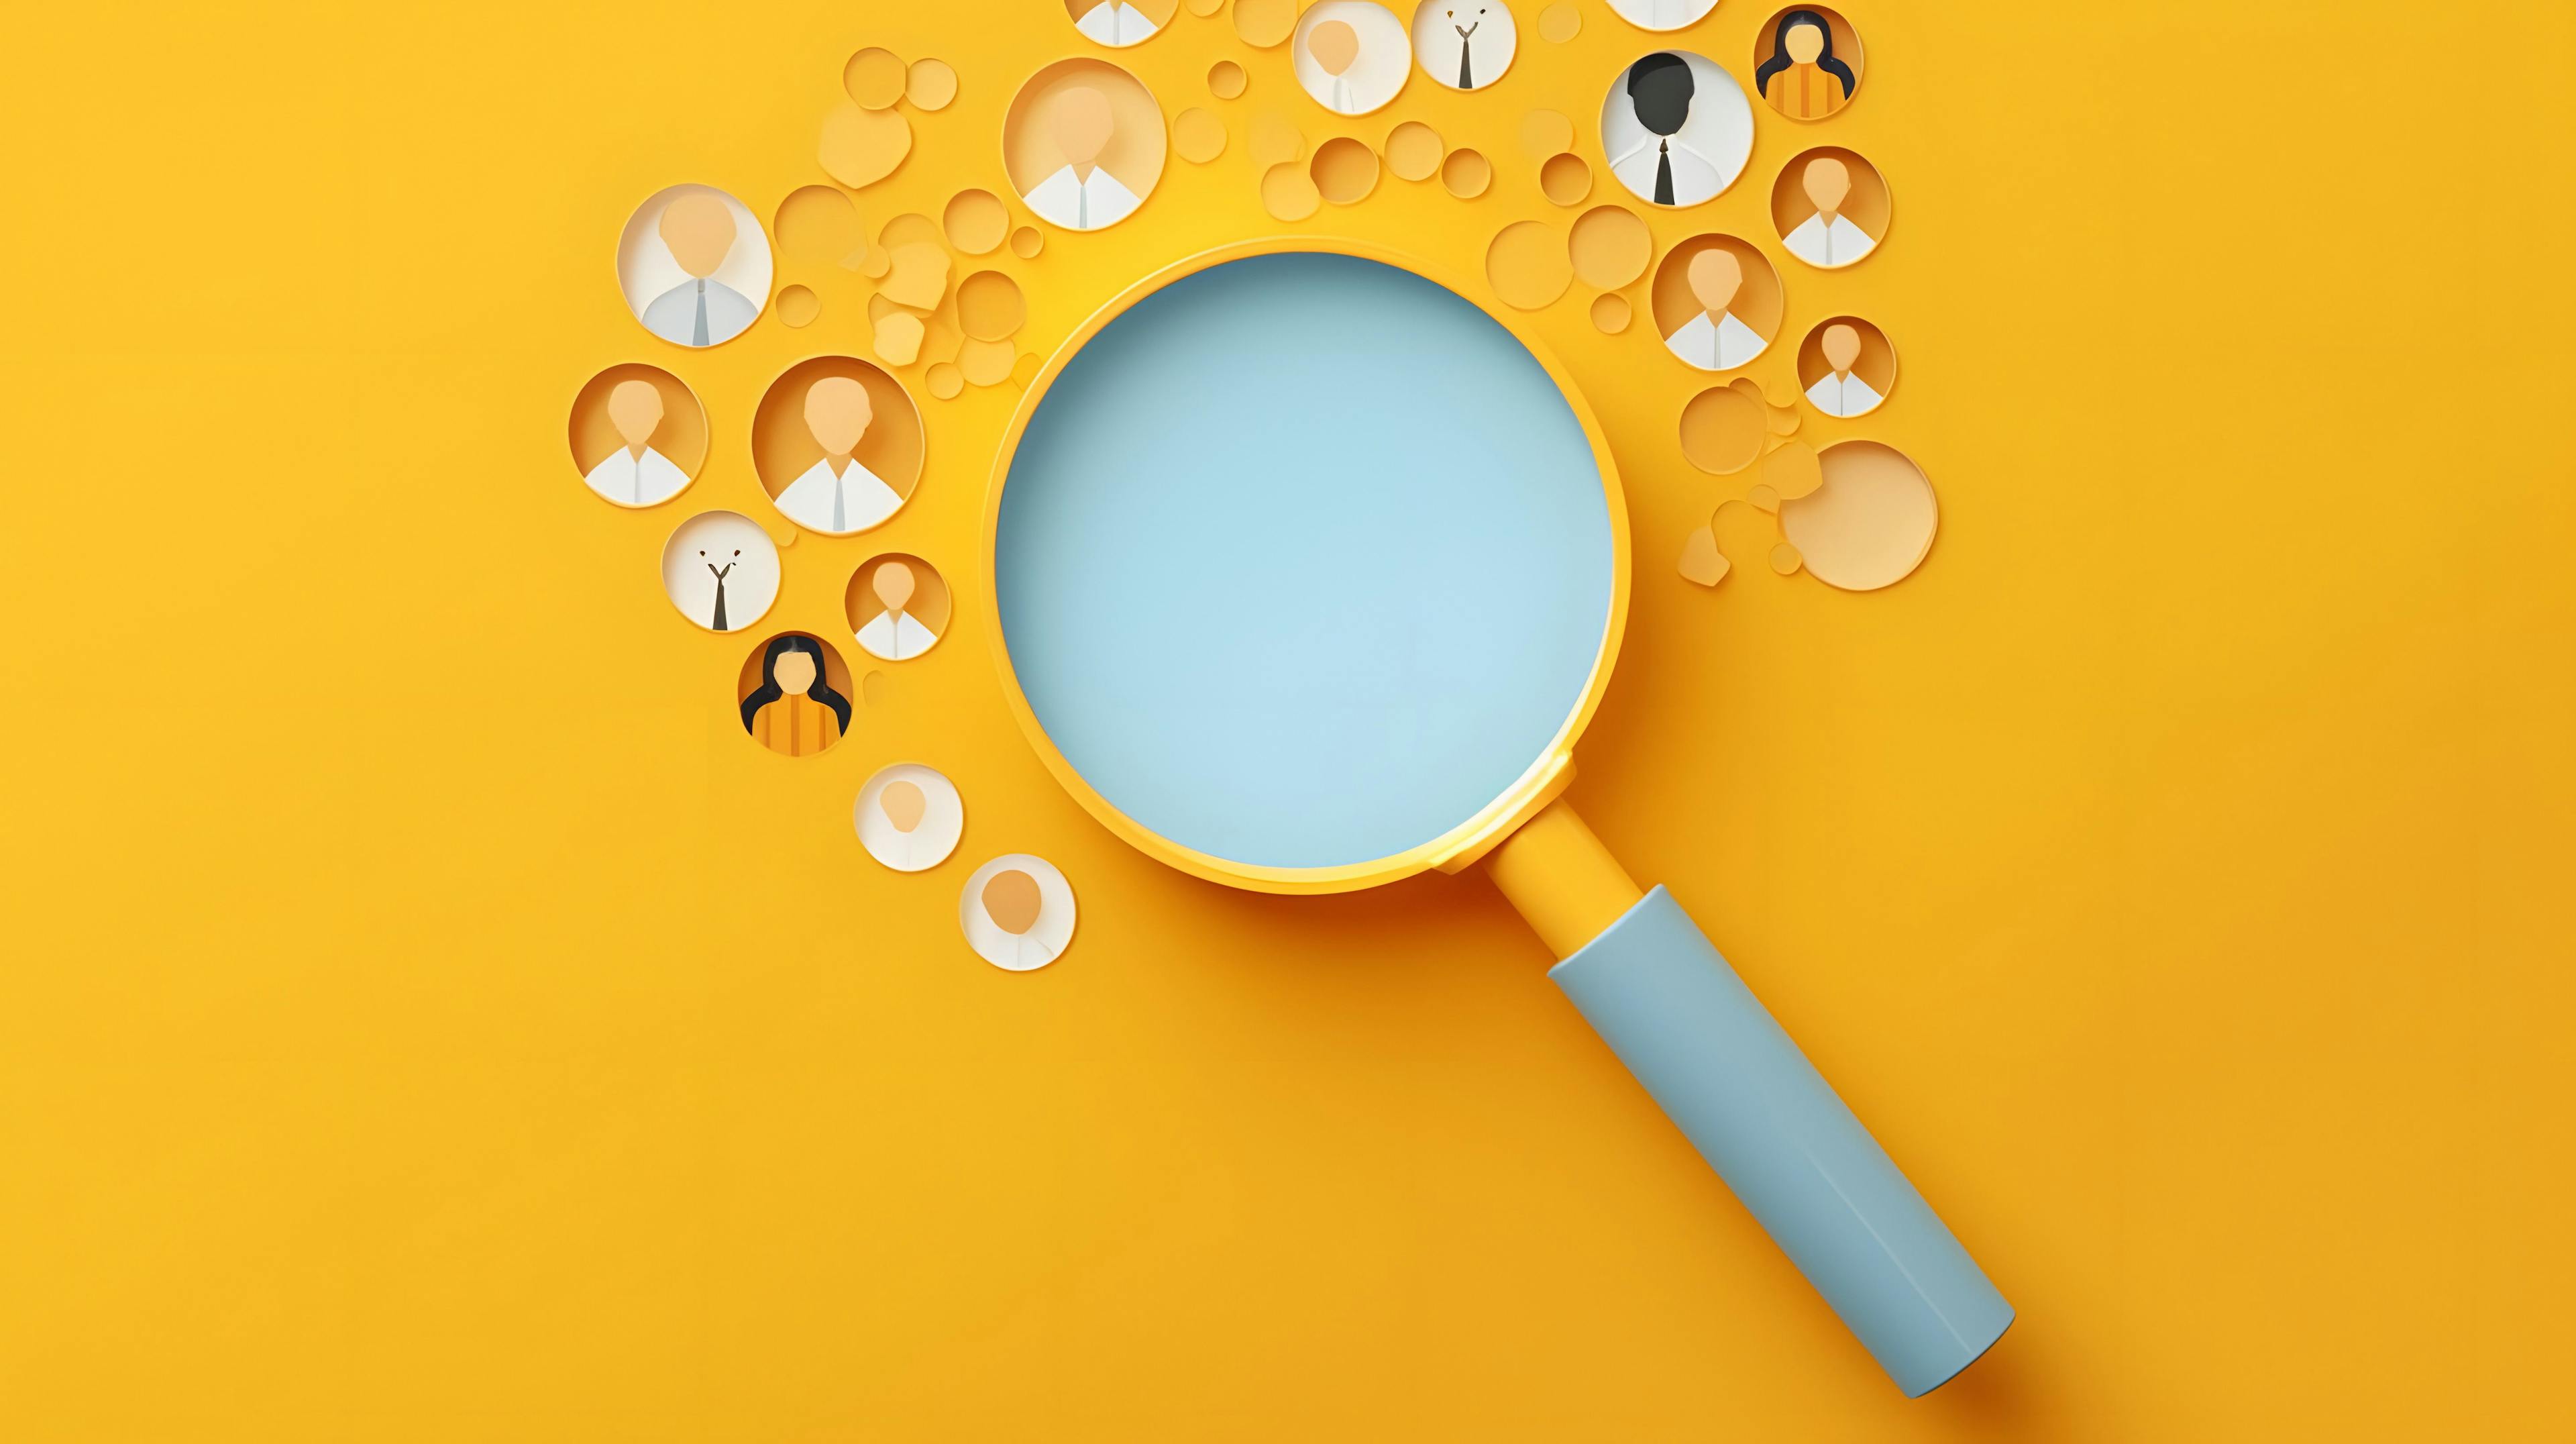 Yellow human icon inside of magnifier glass among white icons for customer focus and customer relation management or CRM concept | Image credit: Prasanth - stock.adobe.com